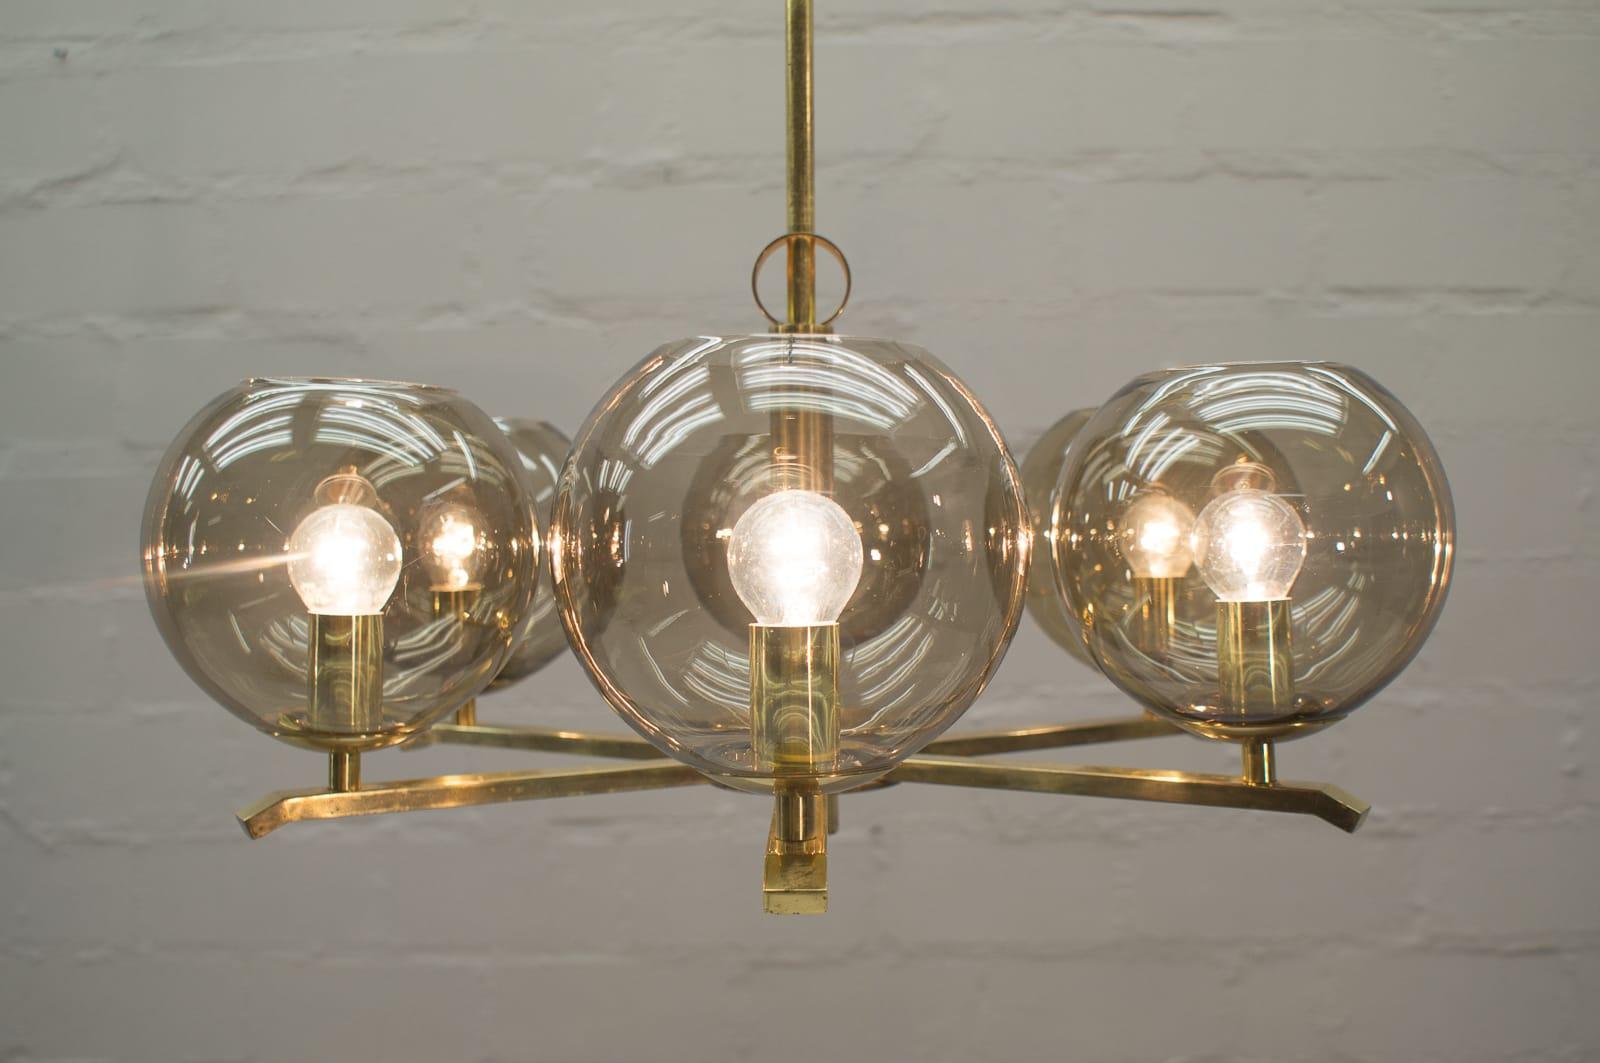 Mid-Century Modern Elegant 1960s Brass Ceiling Lamp with 8 Smoked Glass Globes, Germany For Sale